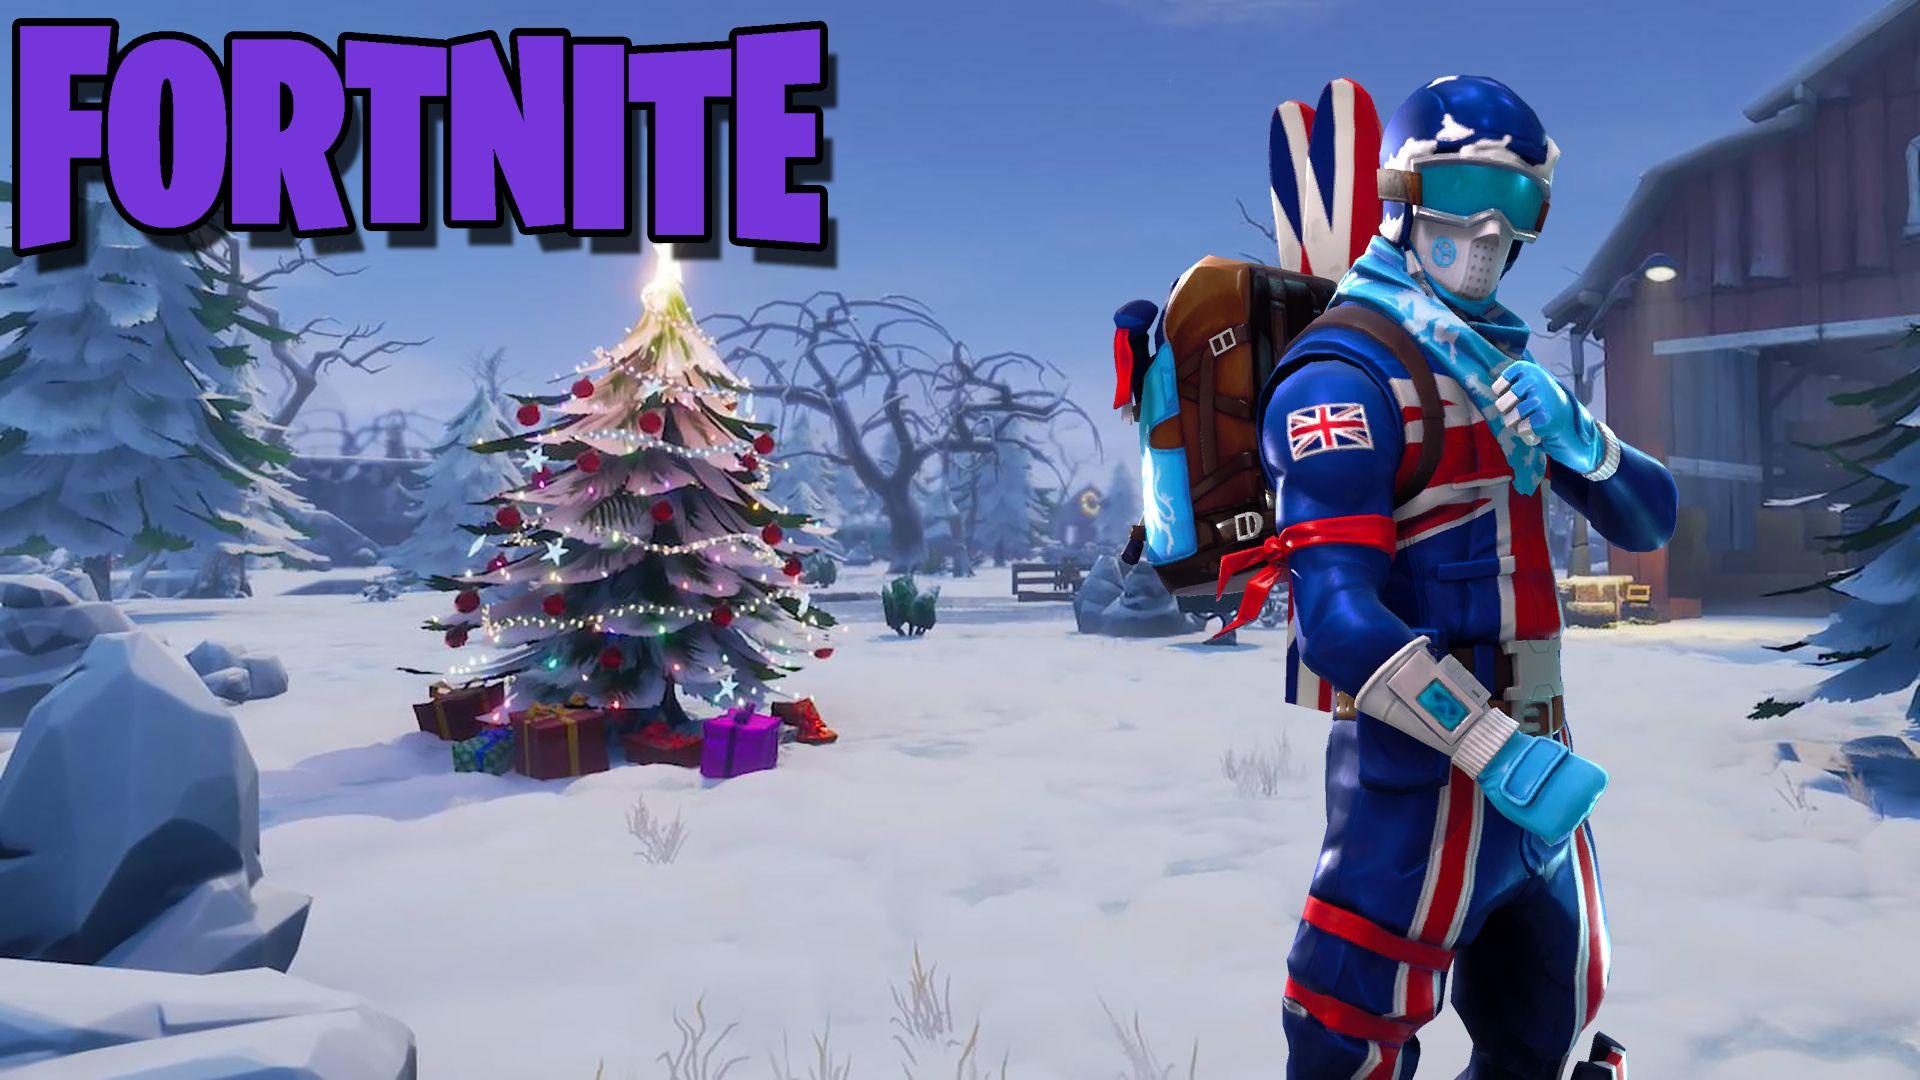 alpine ace gbr great britain fortnite outfit skin fortnite watch - christmas fortnite wallpaper